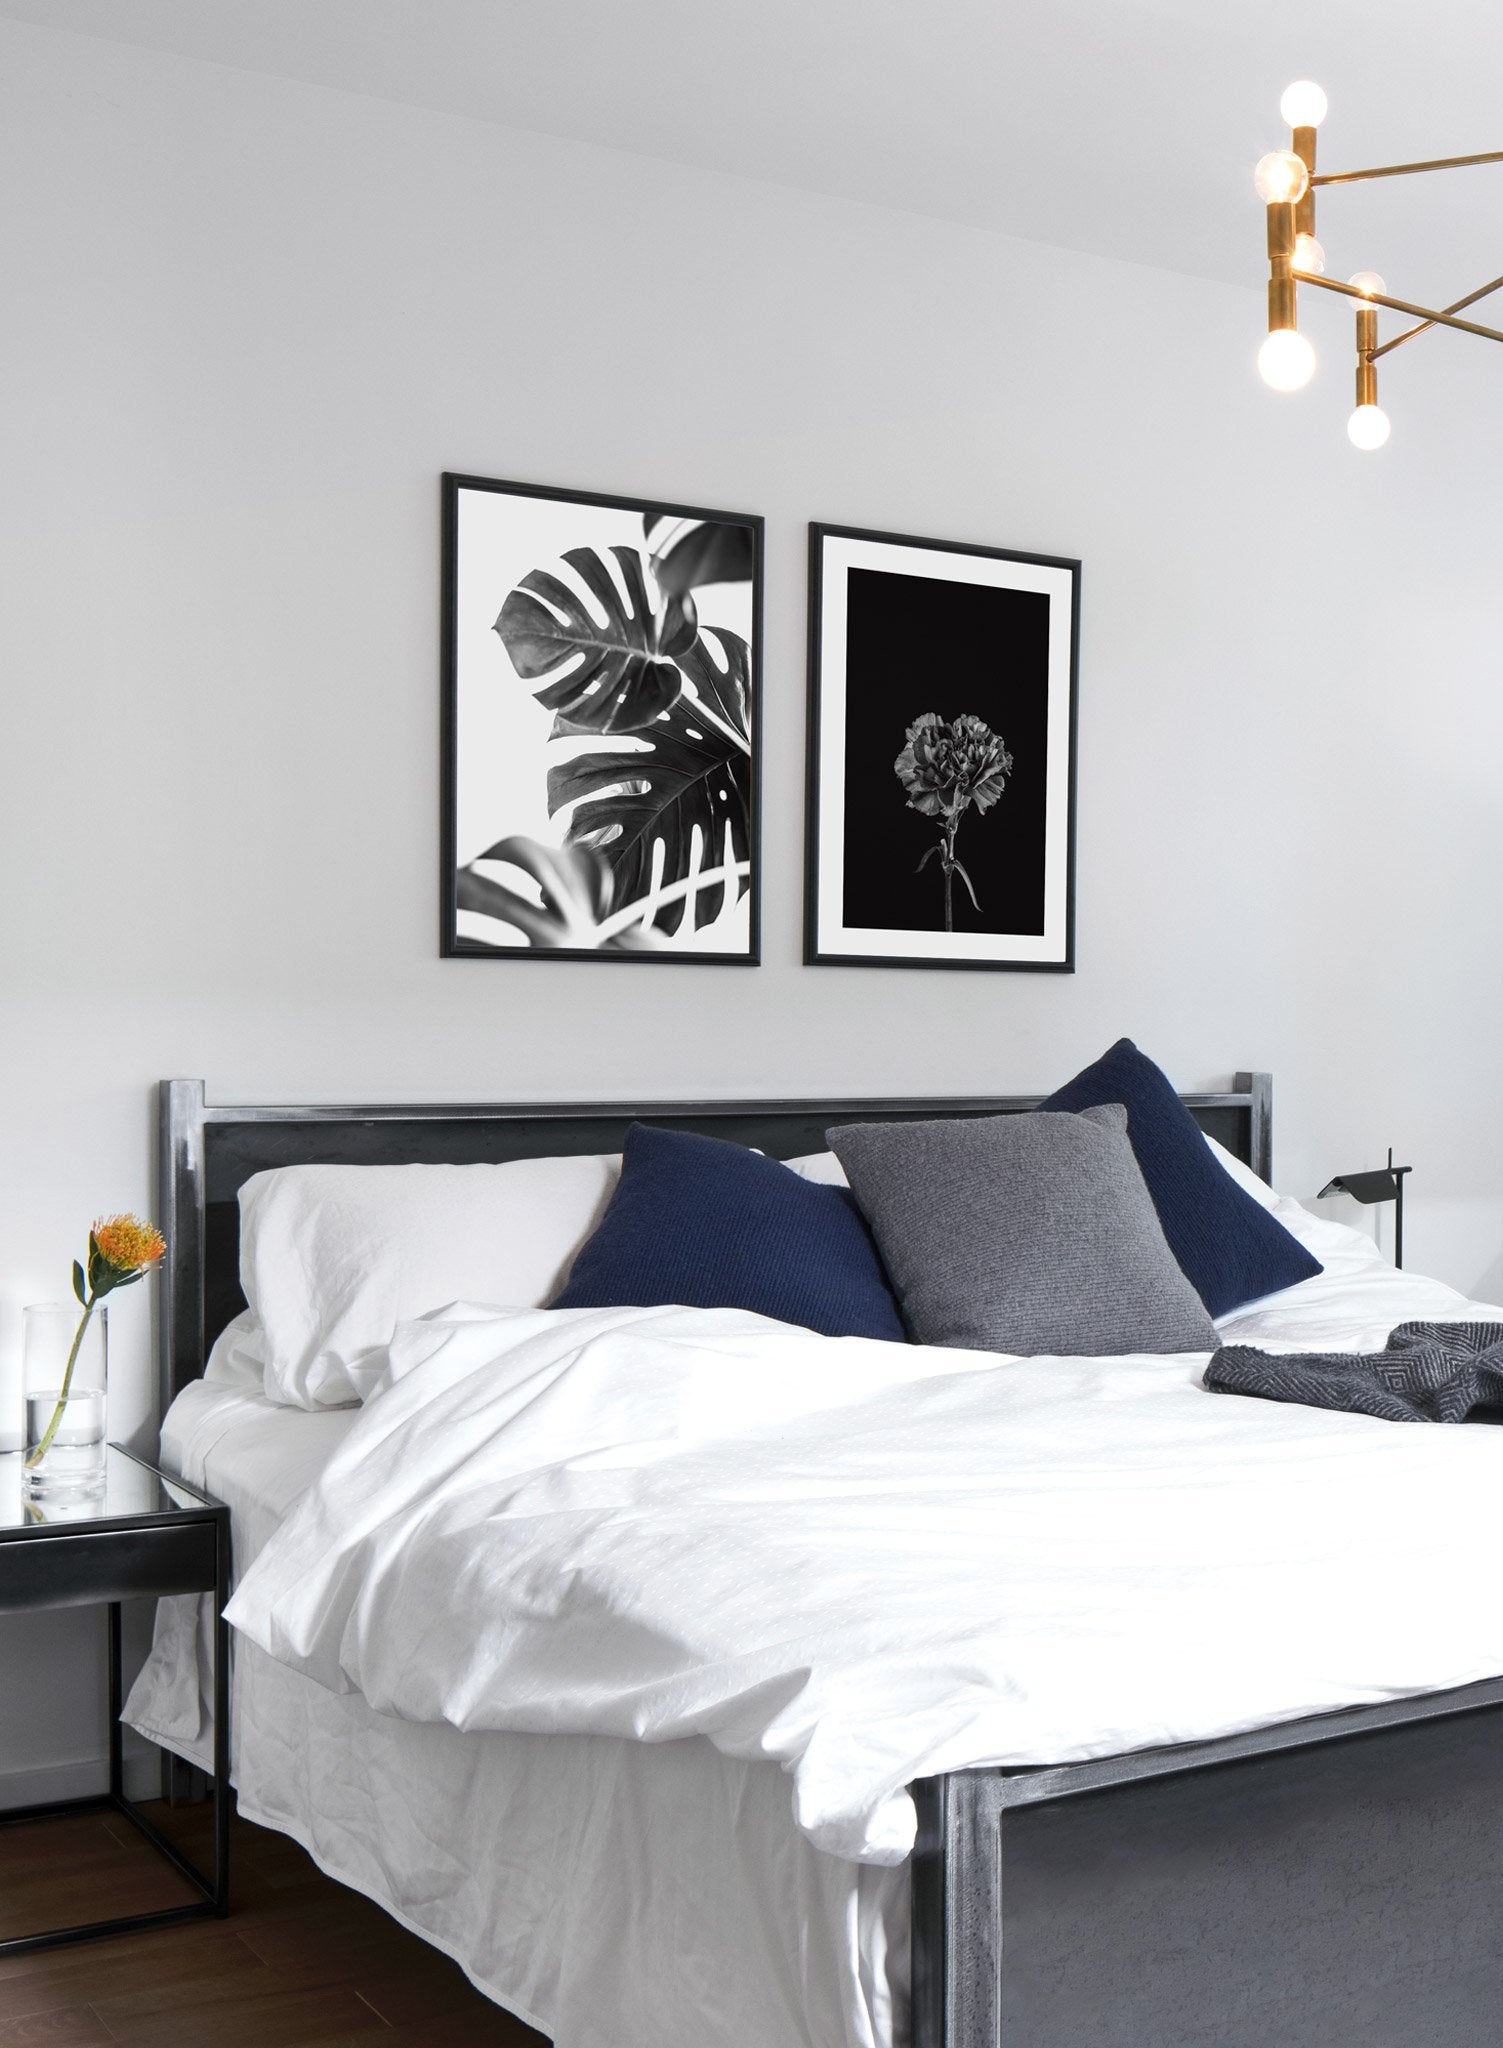 Modern minimalist poster by Opposite Wall with trendy black floral photography - Bedroom